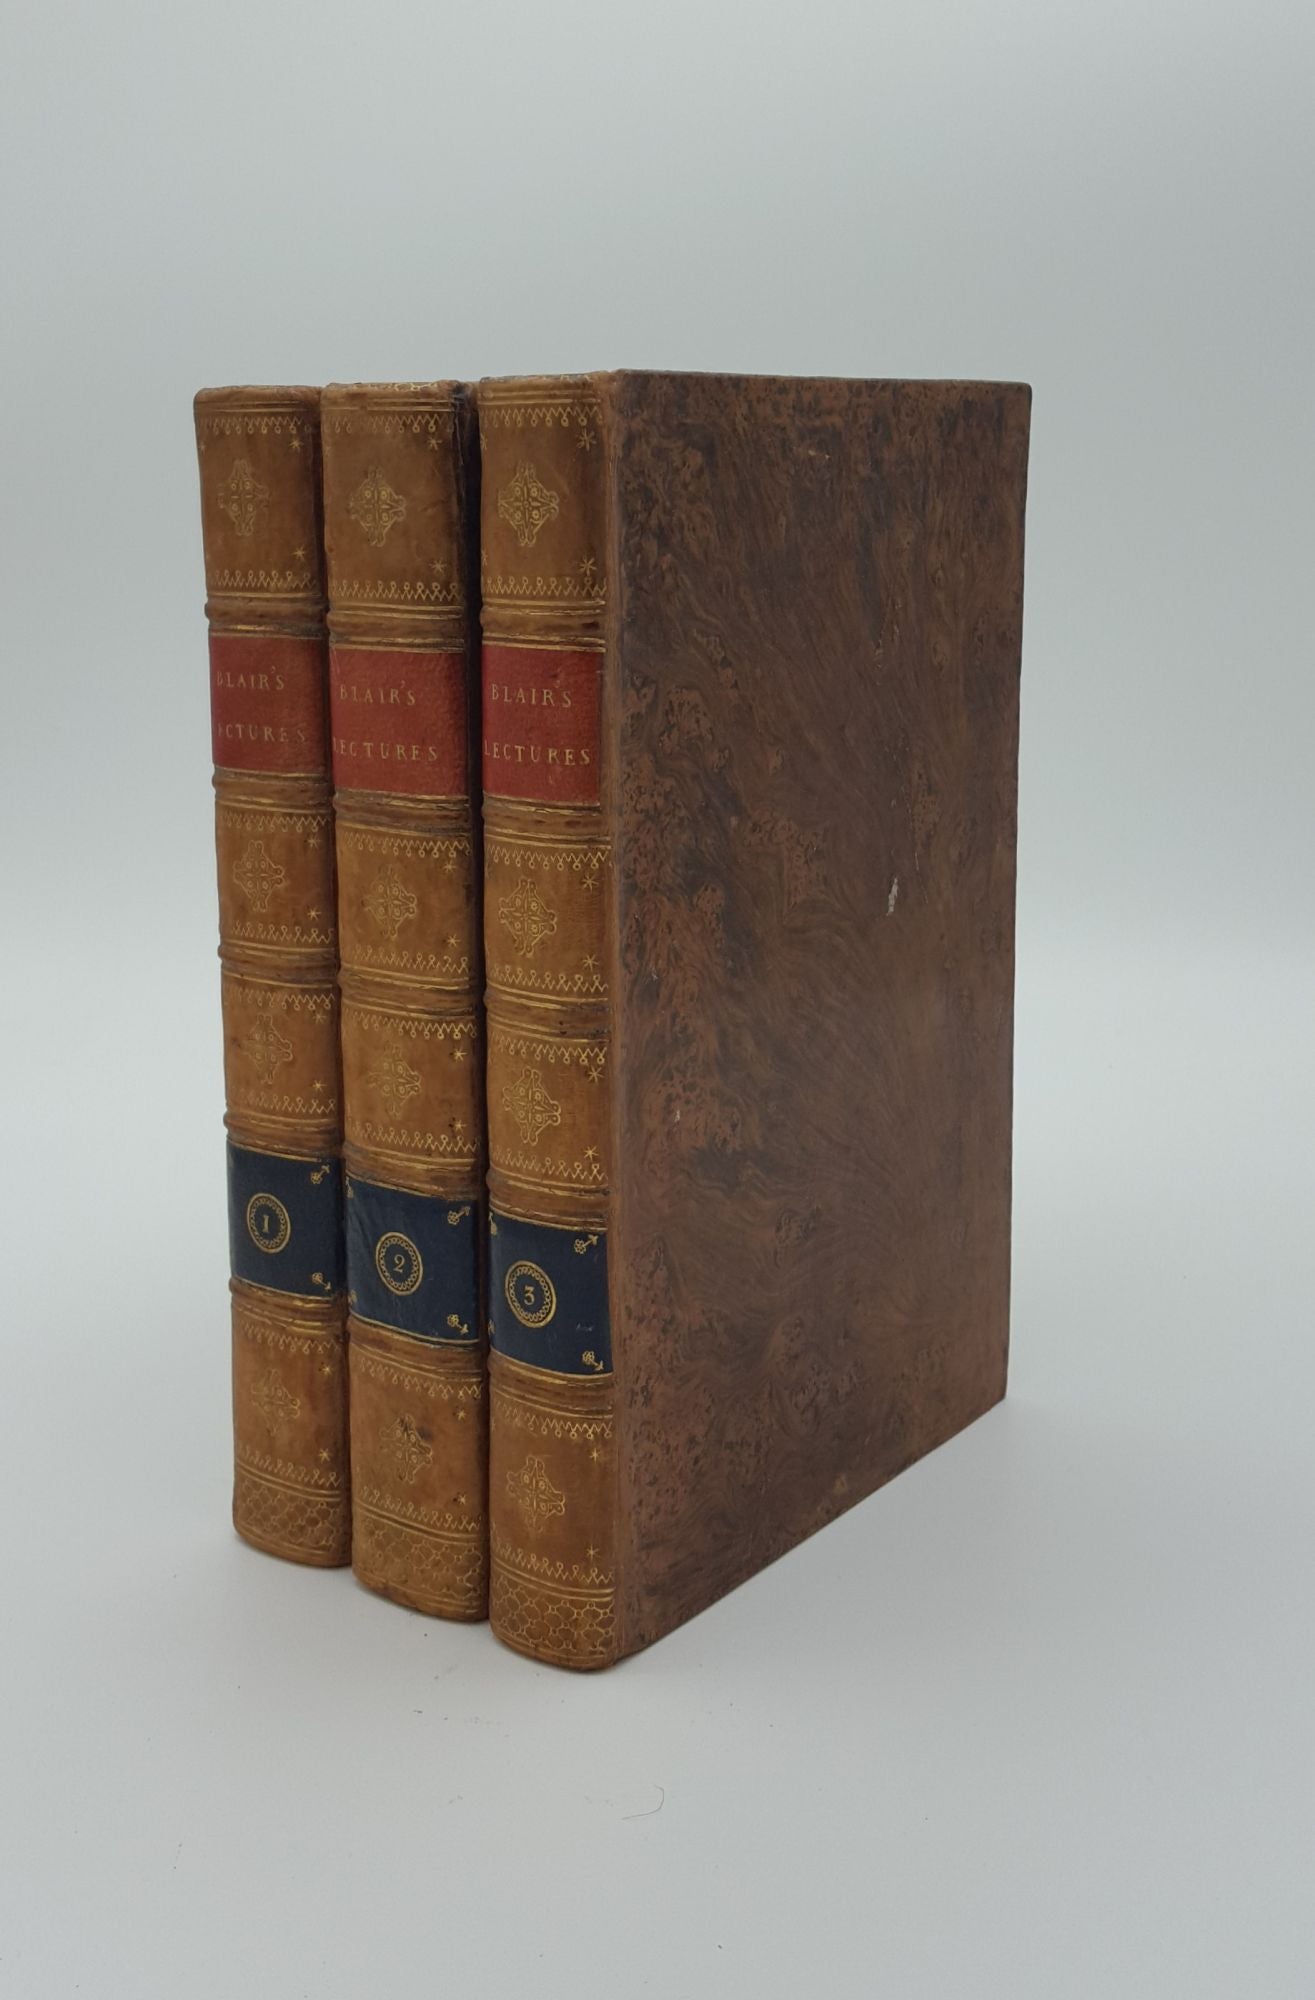 BLAIR Hugh - Lectures on Rhetoric and Belles Lettres Tenth Edition in Three Volumes